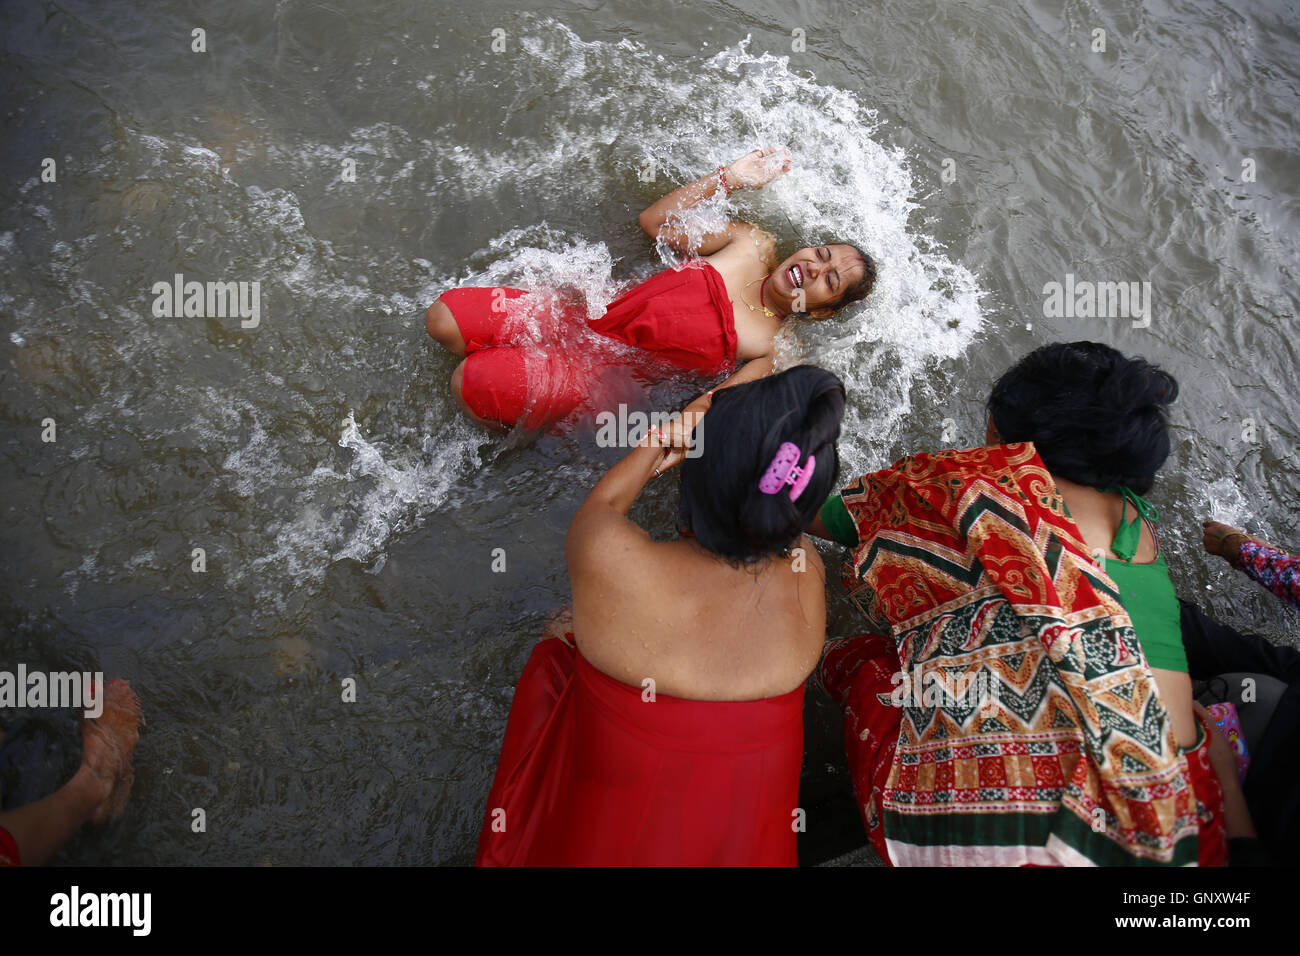 Kathmandu, Nepal. 1st Sep, 2016. A Nepalese Hindu devotee takes a holy dip on the banks of the religious Bagmati River to commemorate Fathers day or Kuse Aunse at Gokarna Temple in Kathmandu, Nepal. On this particular day Hindu devotees from all over the country come to perform prayers by taking holy dips and offering worship in memory of their deceased fathers for eternal peace. © Skanda Gautam/ZUMA Wire/Alamy Live News Stock Photo